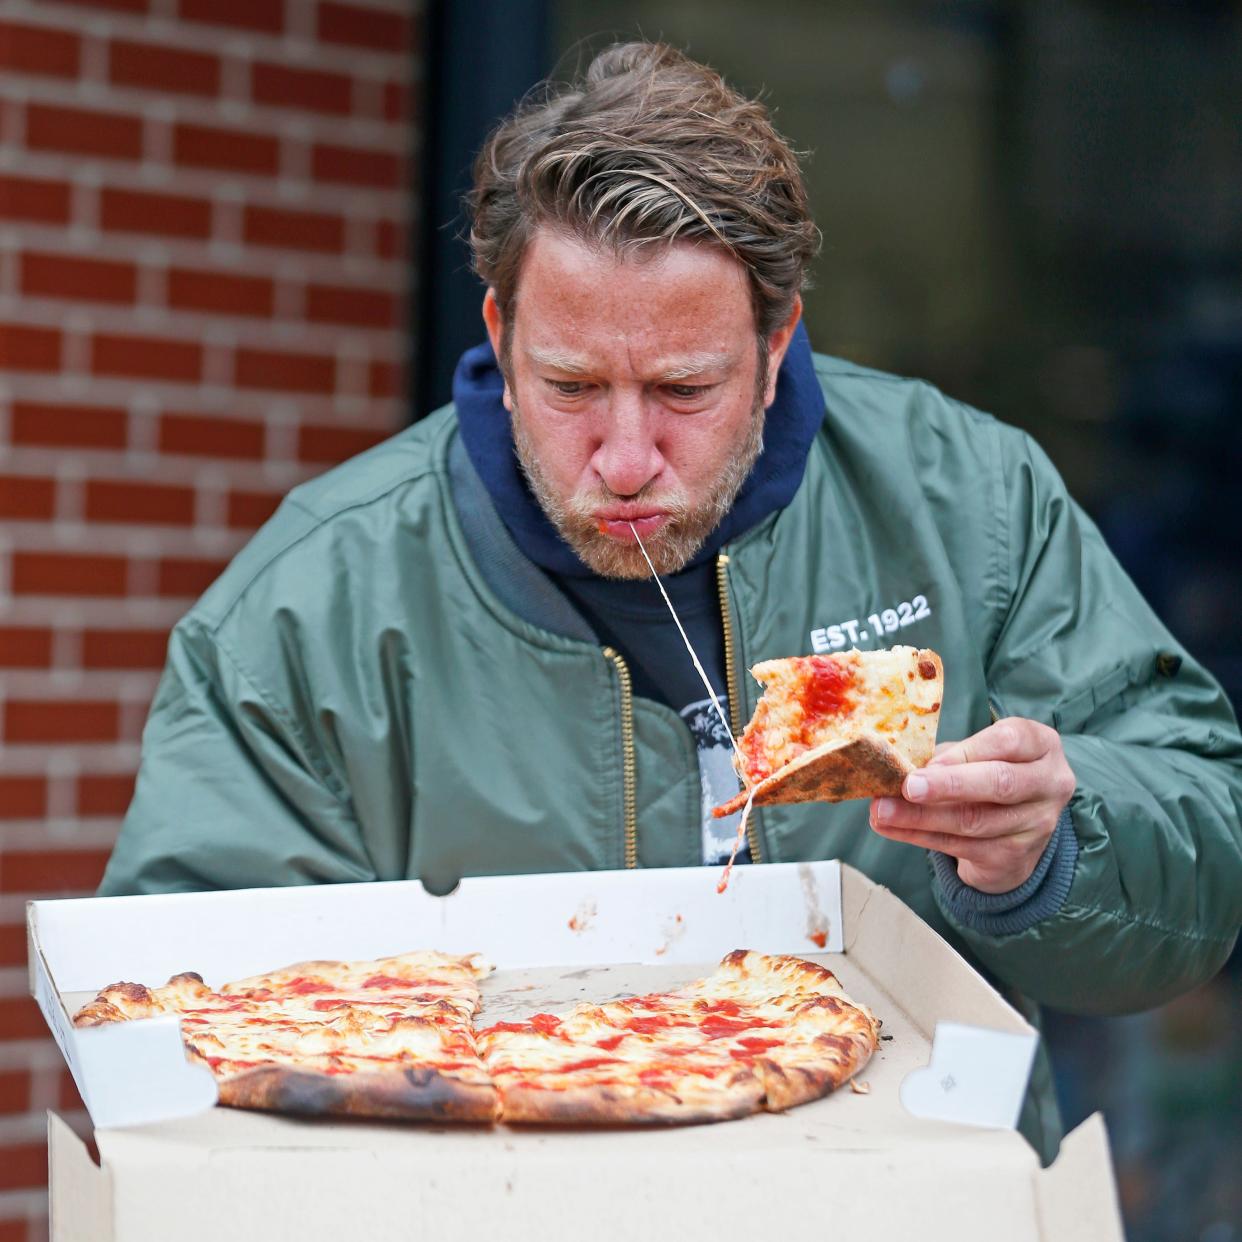 The third leg of Barstool Sports' founder and pizza influencer Dave Portnoy's journey in Rhode Island took him to Providence's Nice Slice, where his appearance came as a shock to employees inside.